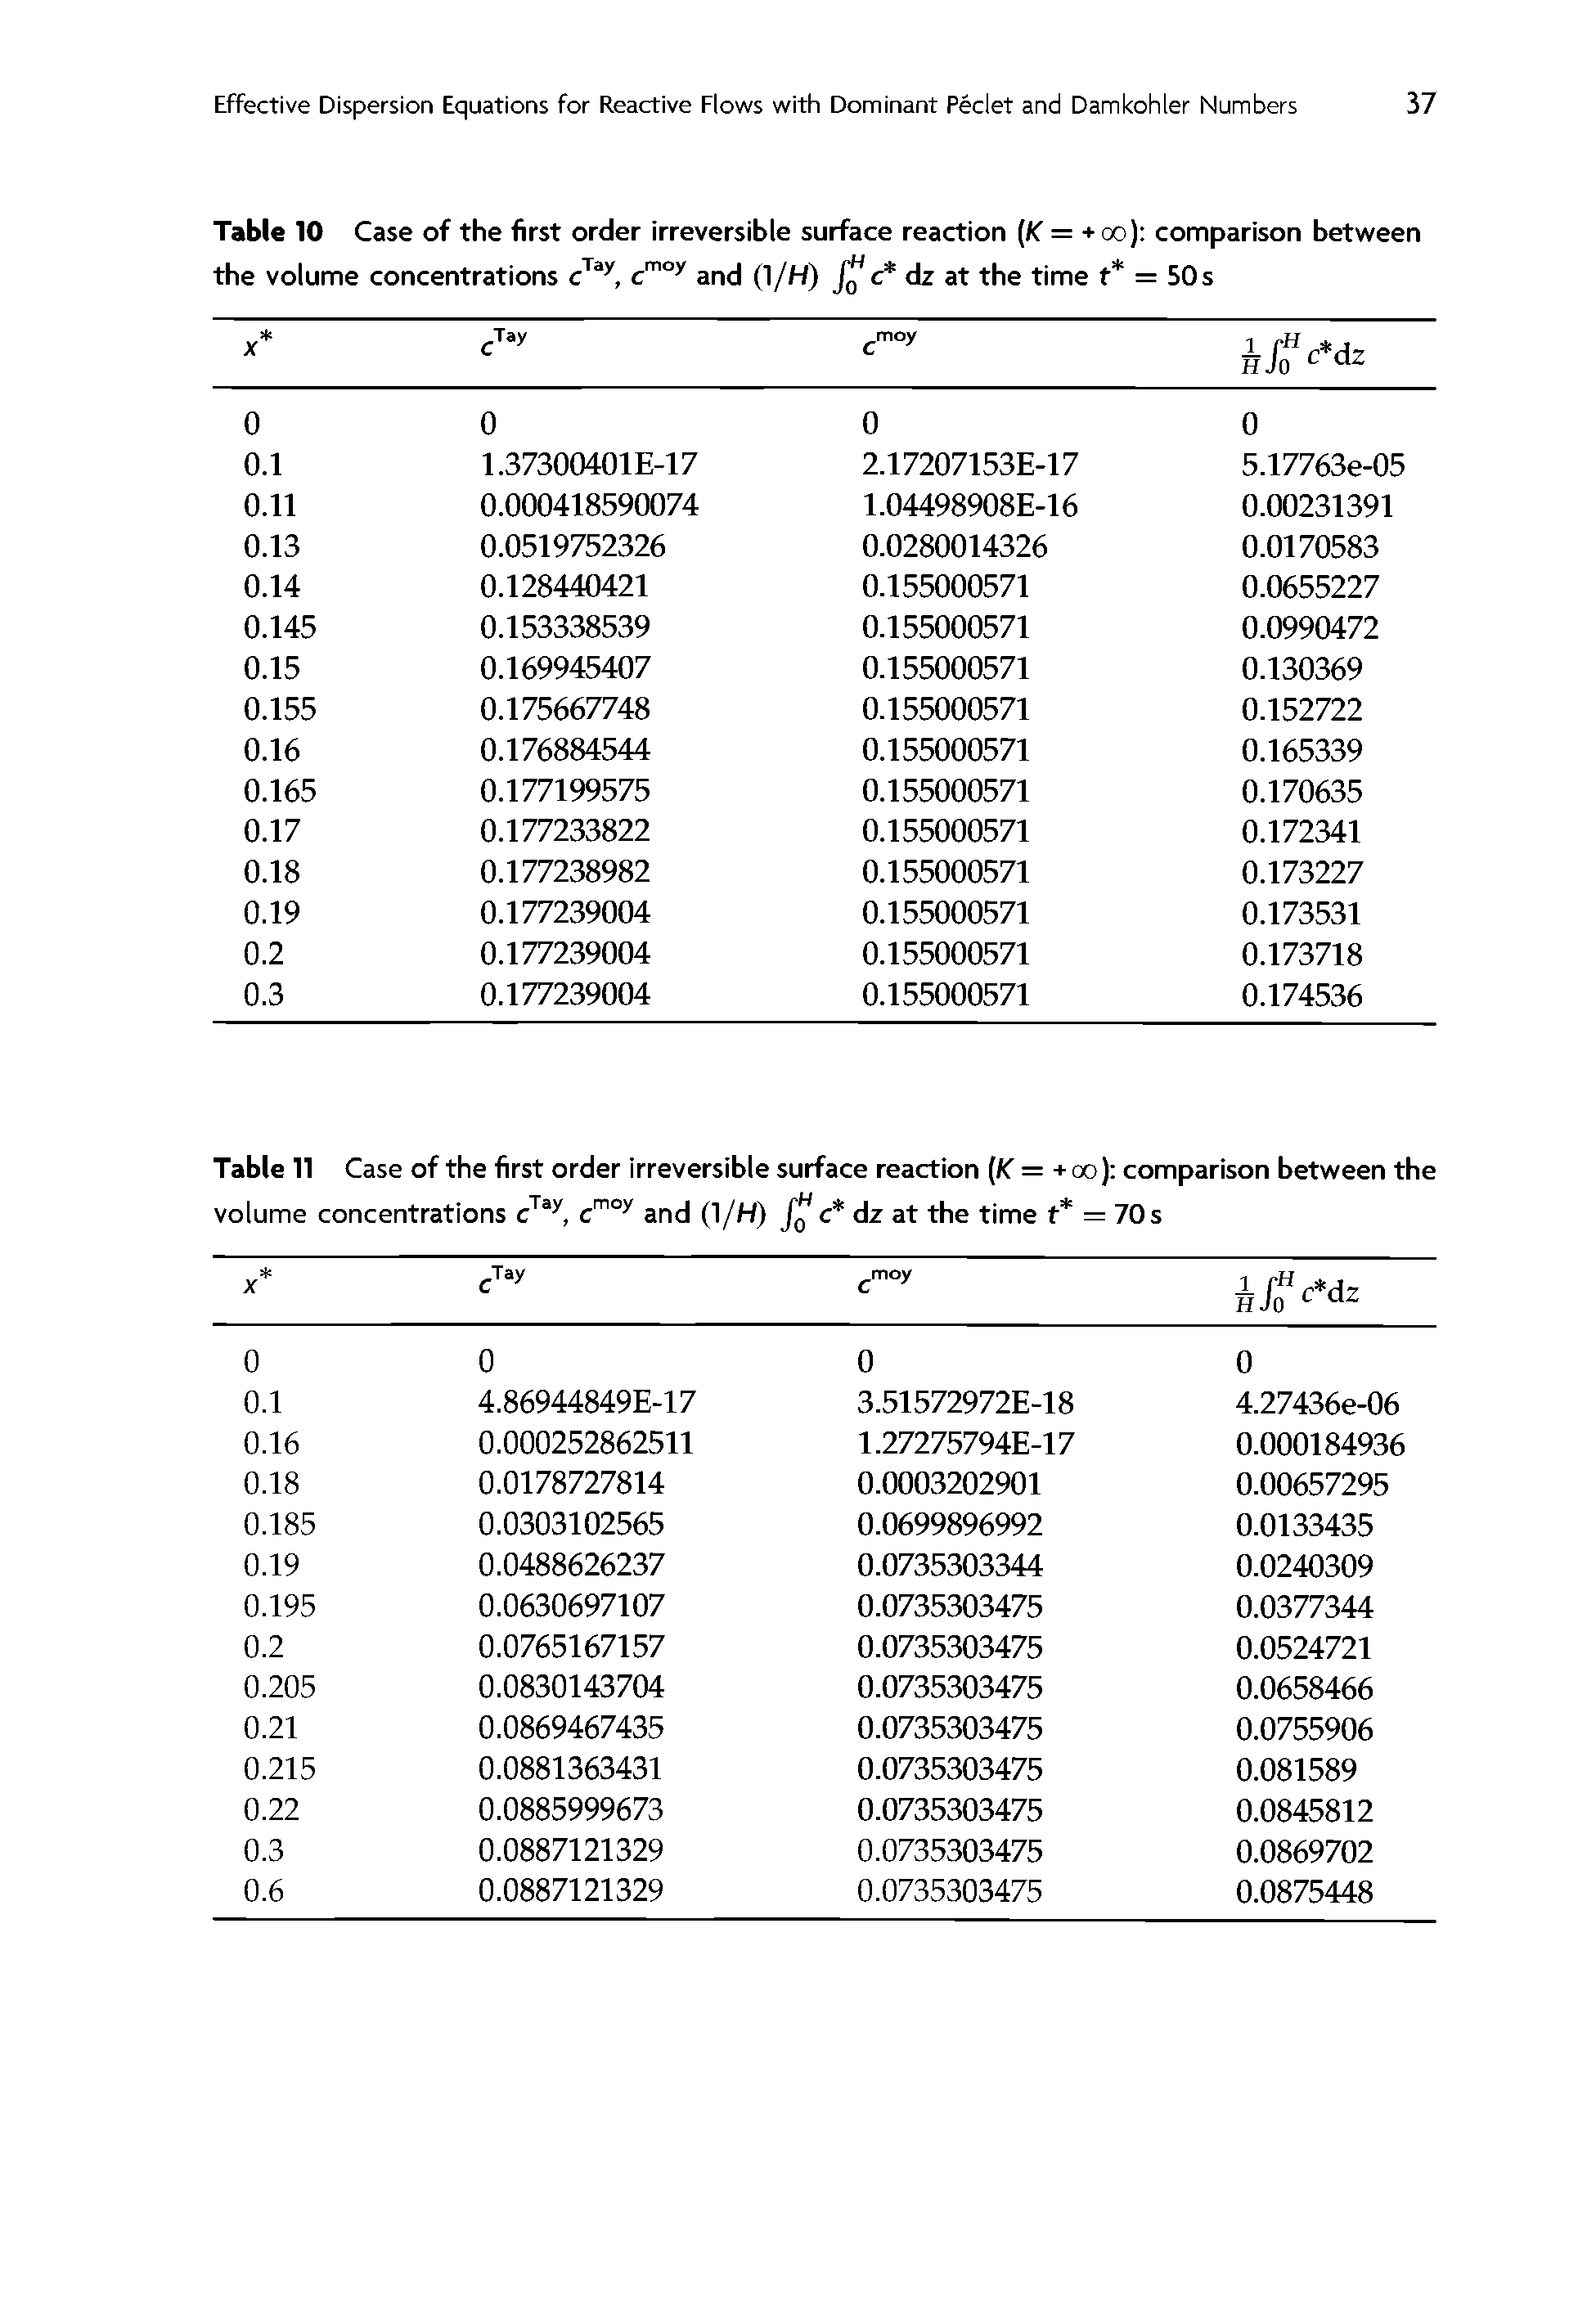 Table 10 Case of the first order irreversible surface reaction [K = +oo) comparison between the volume concentrations c" ° and (1/H) c dz at the time t = 50 s...